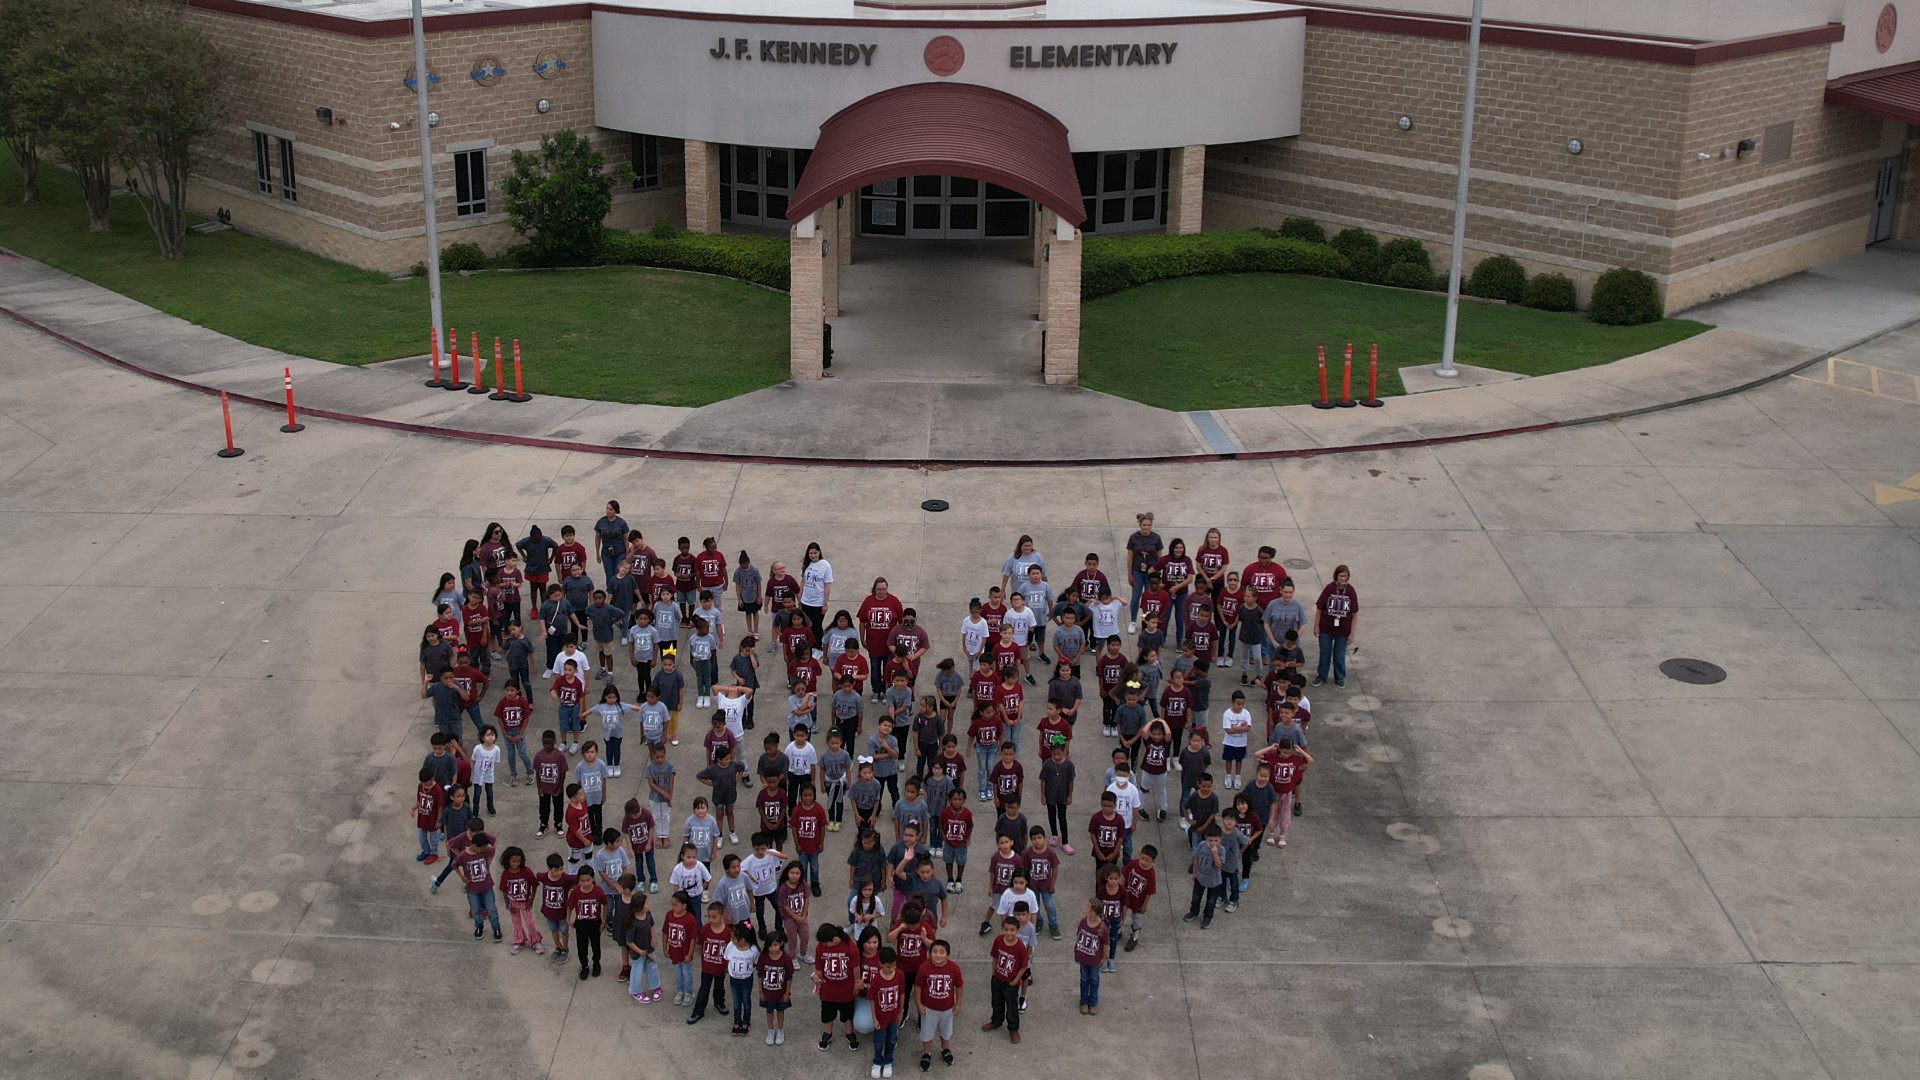 When teachers at JFK Elementary found out their field day would fall on May 24, exactly one year after the shooting, they knew they had to do something special.